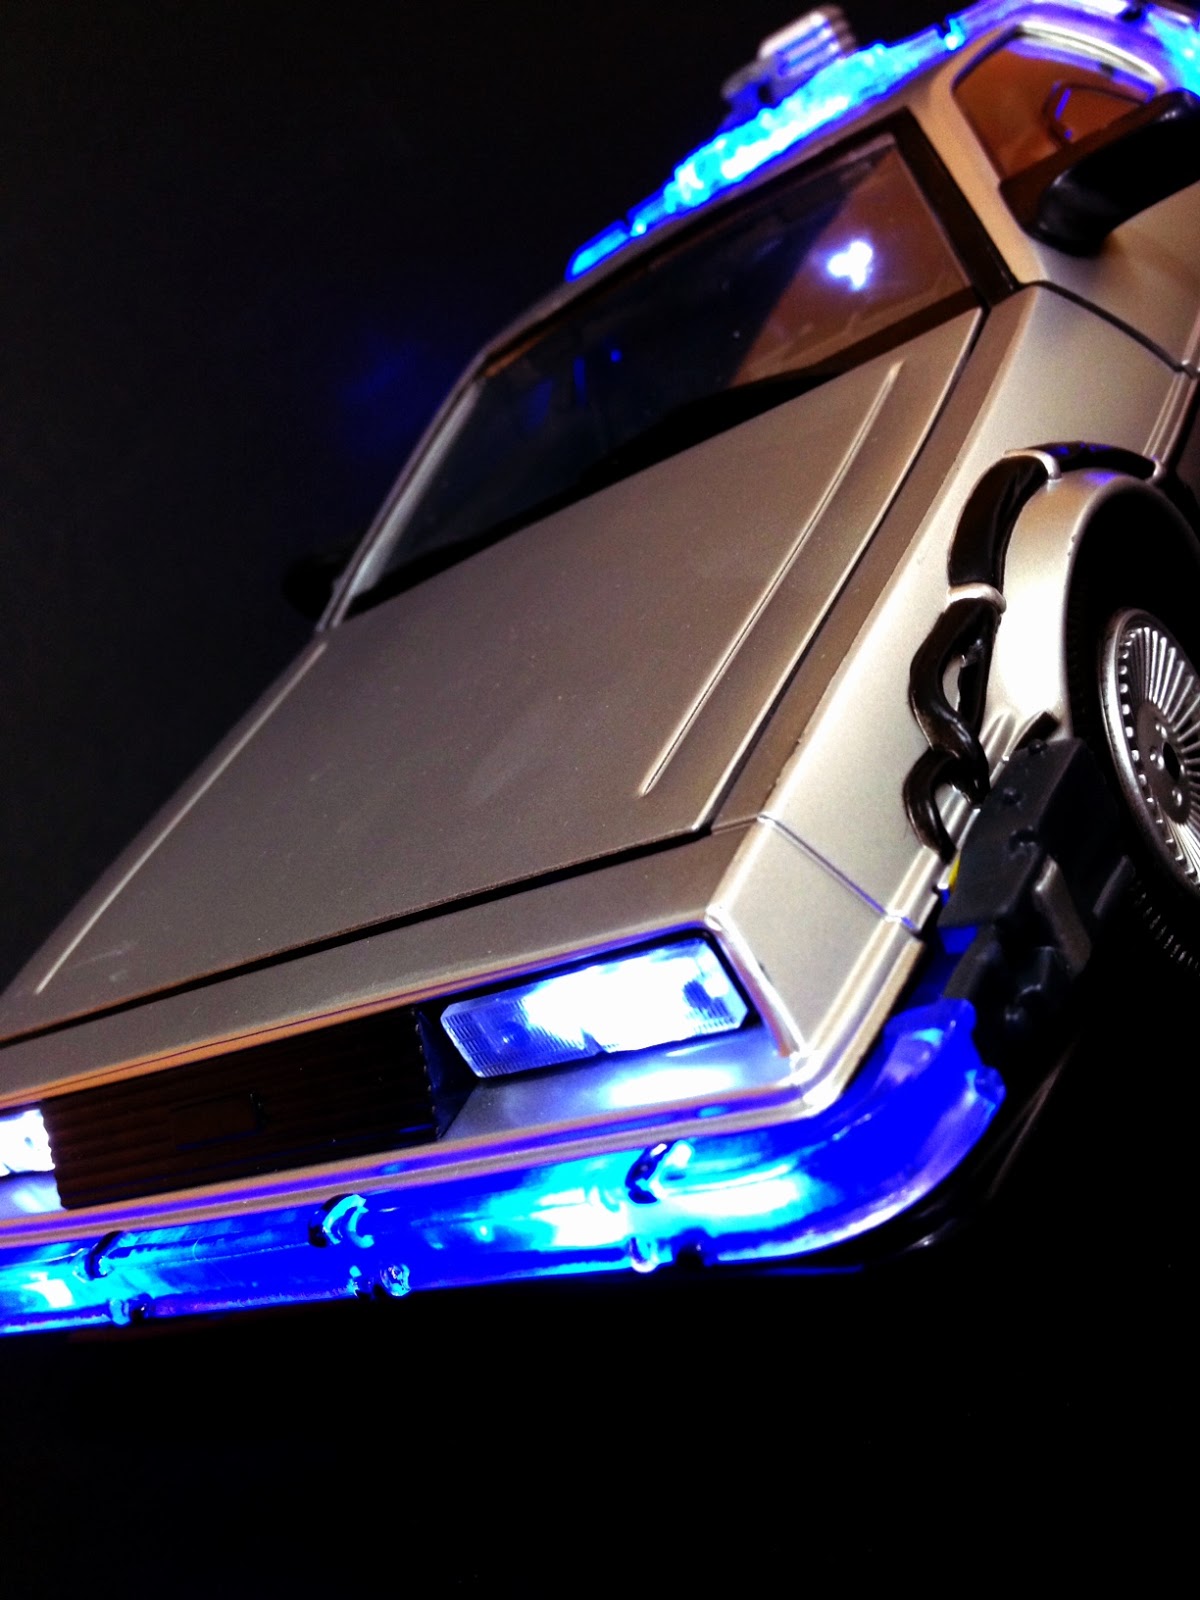 DeLorean to go Back to the Future by making cars again Business 